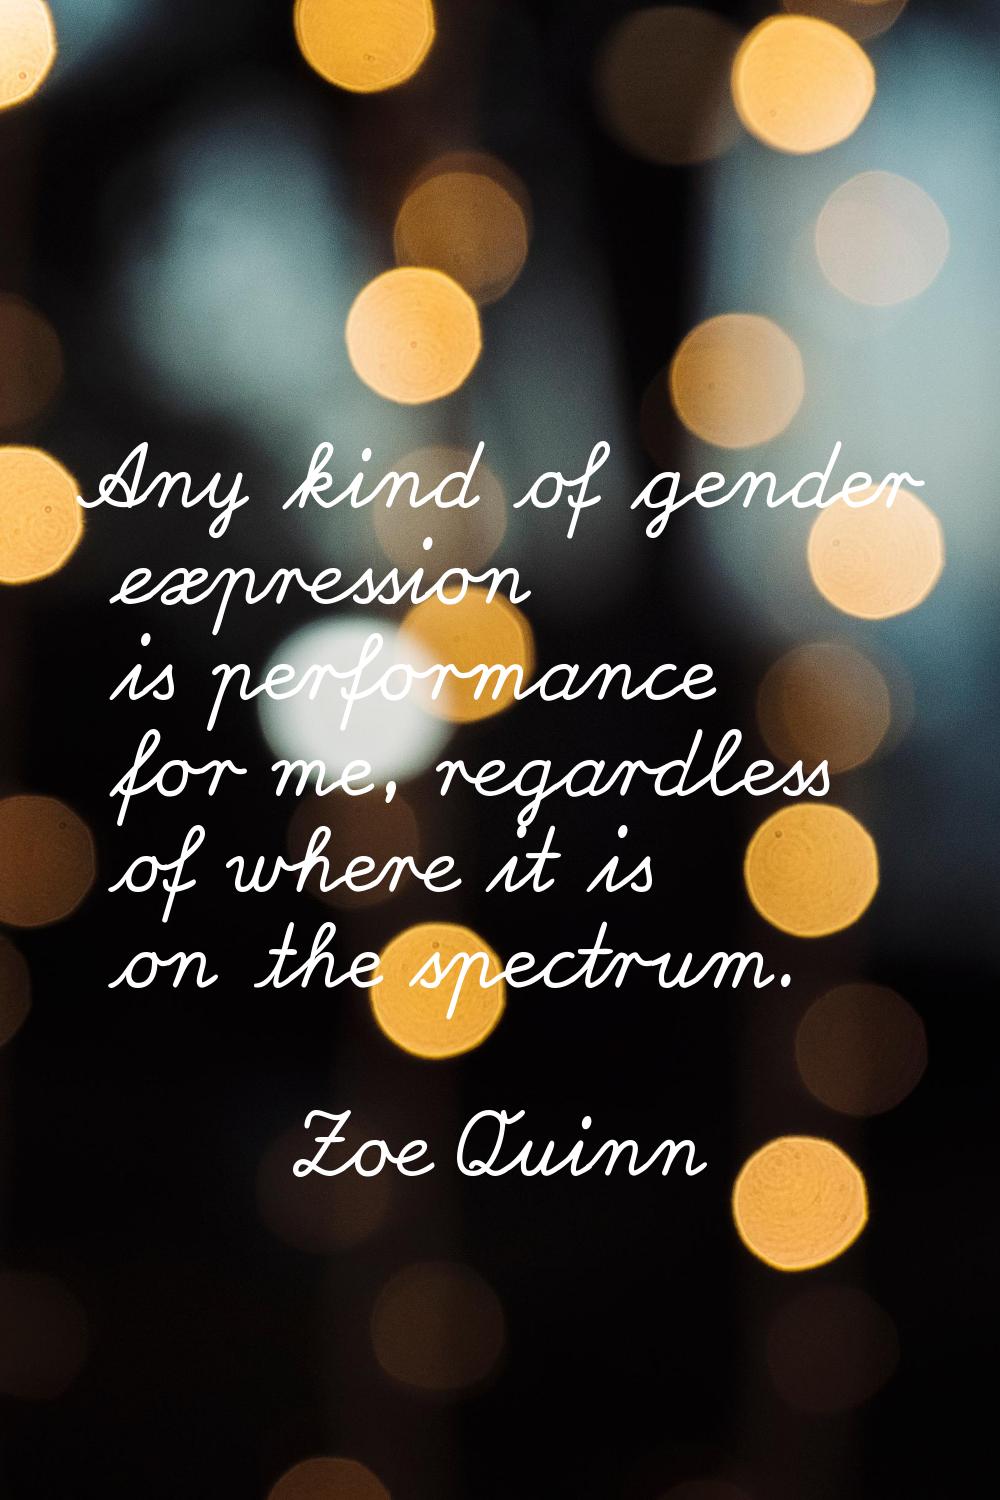 Any kind of gender expression is performance for me, regardless of where it is on the spectrum.